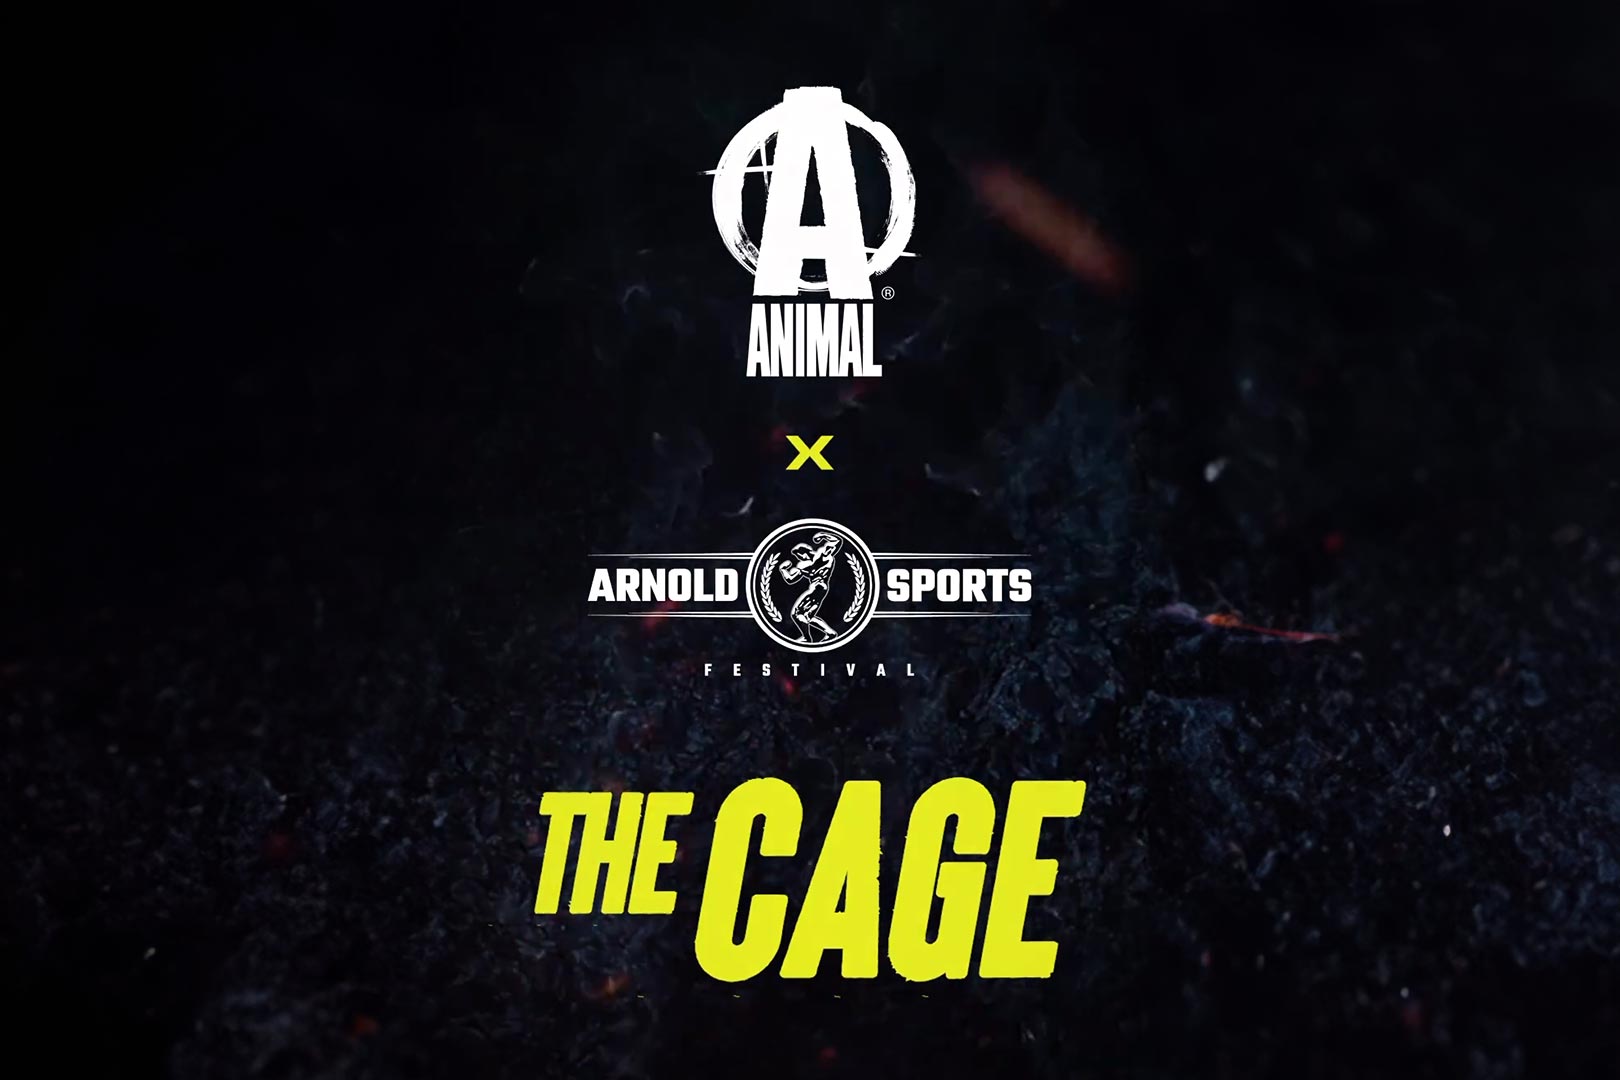 Animal Return Of The Cage